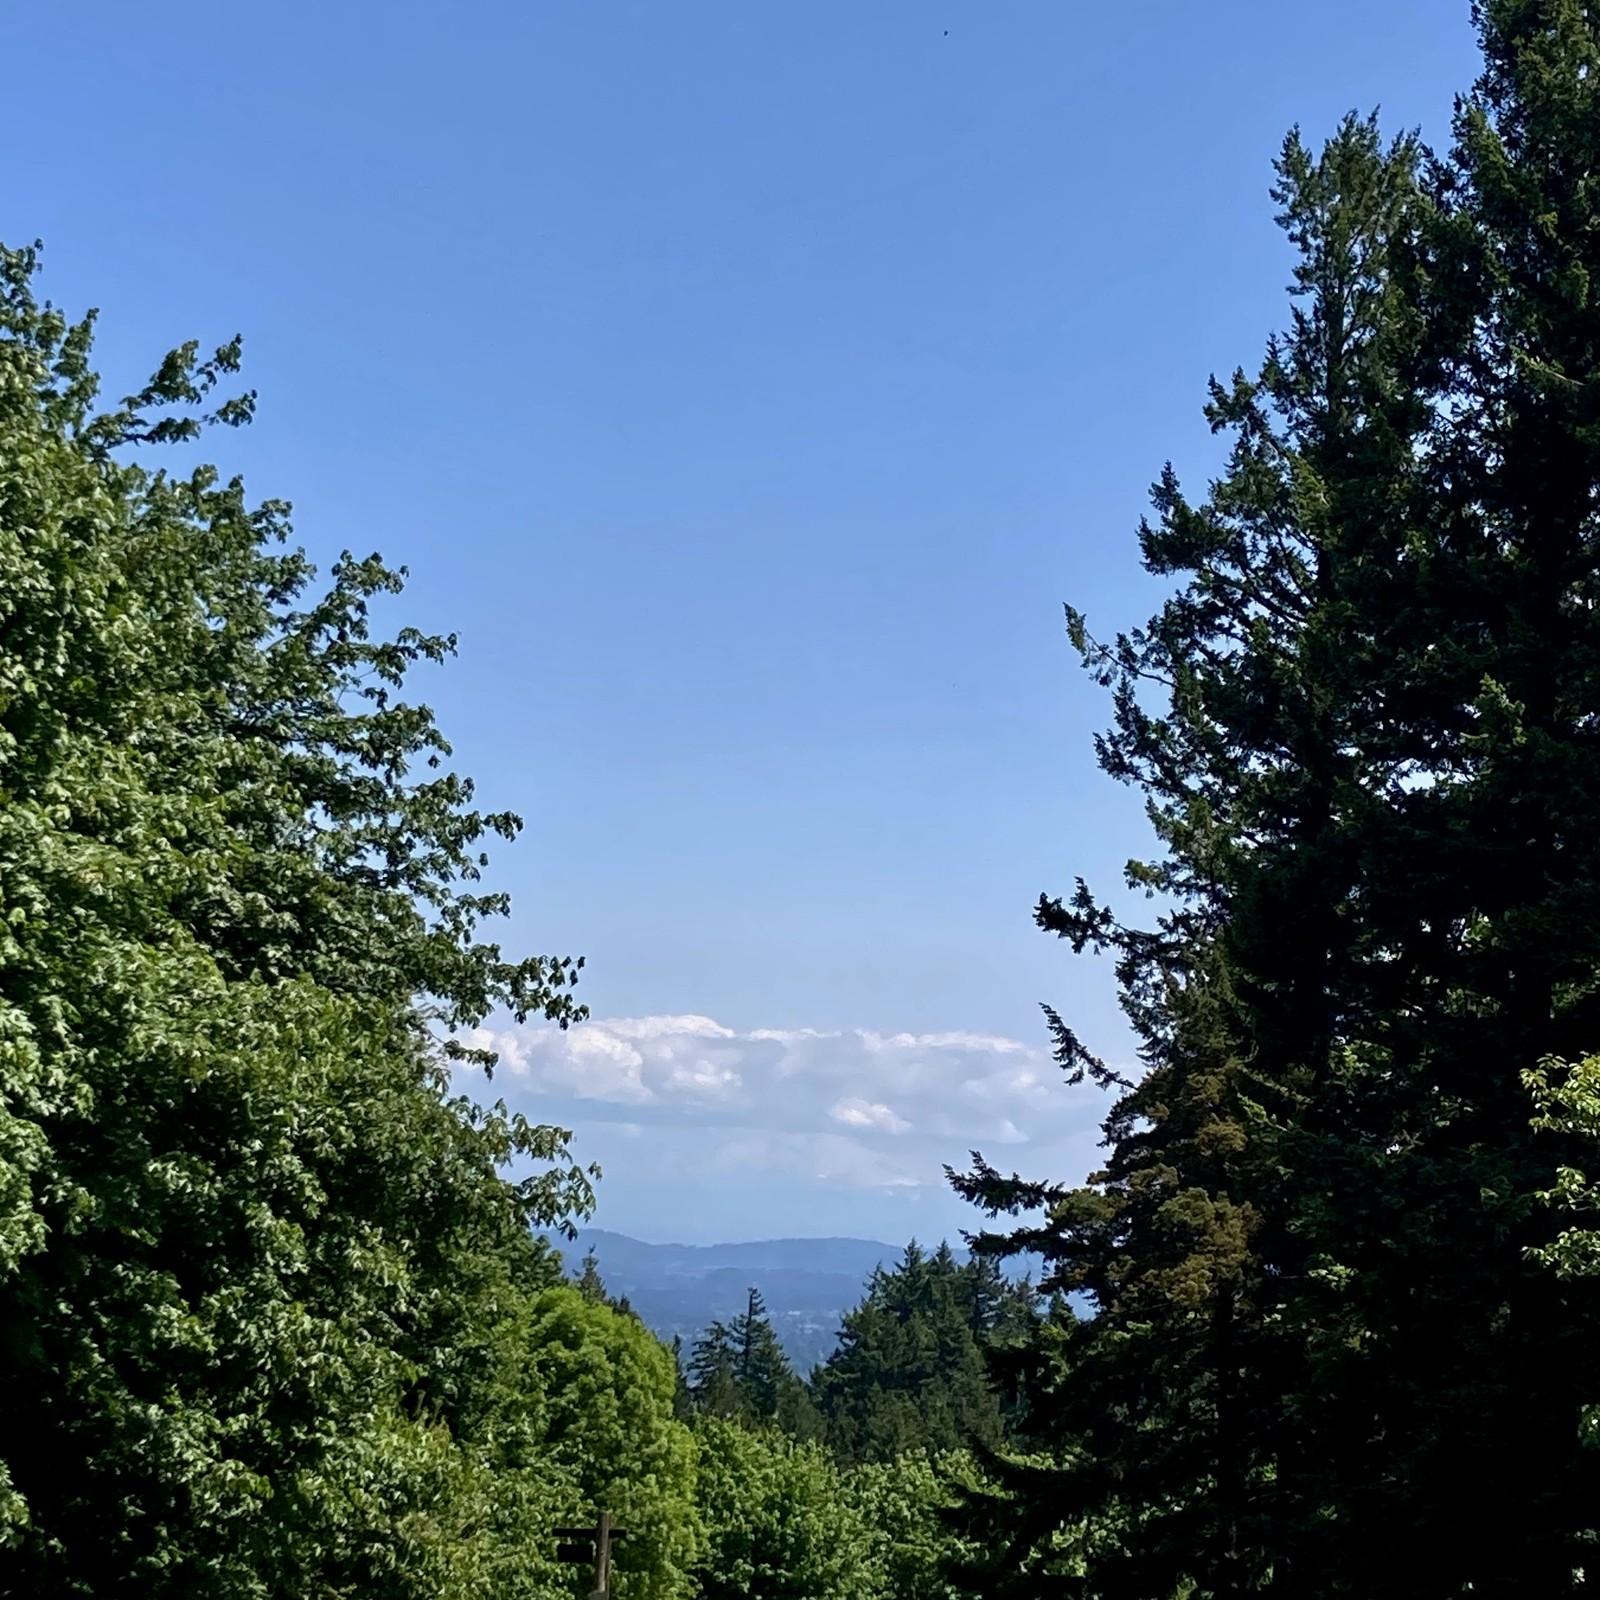 Mt Hood glowers under a dark cloud in an otherwise sunny sky. Taken from Council crest park